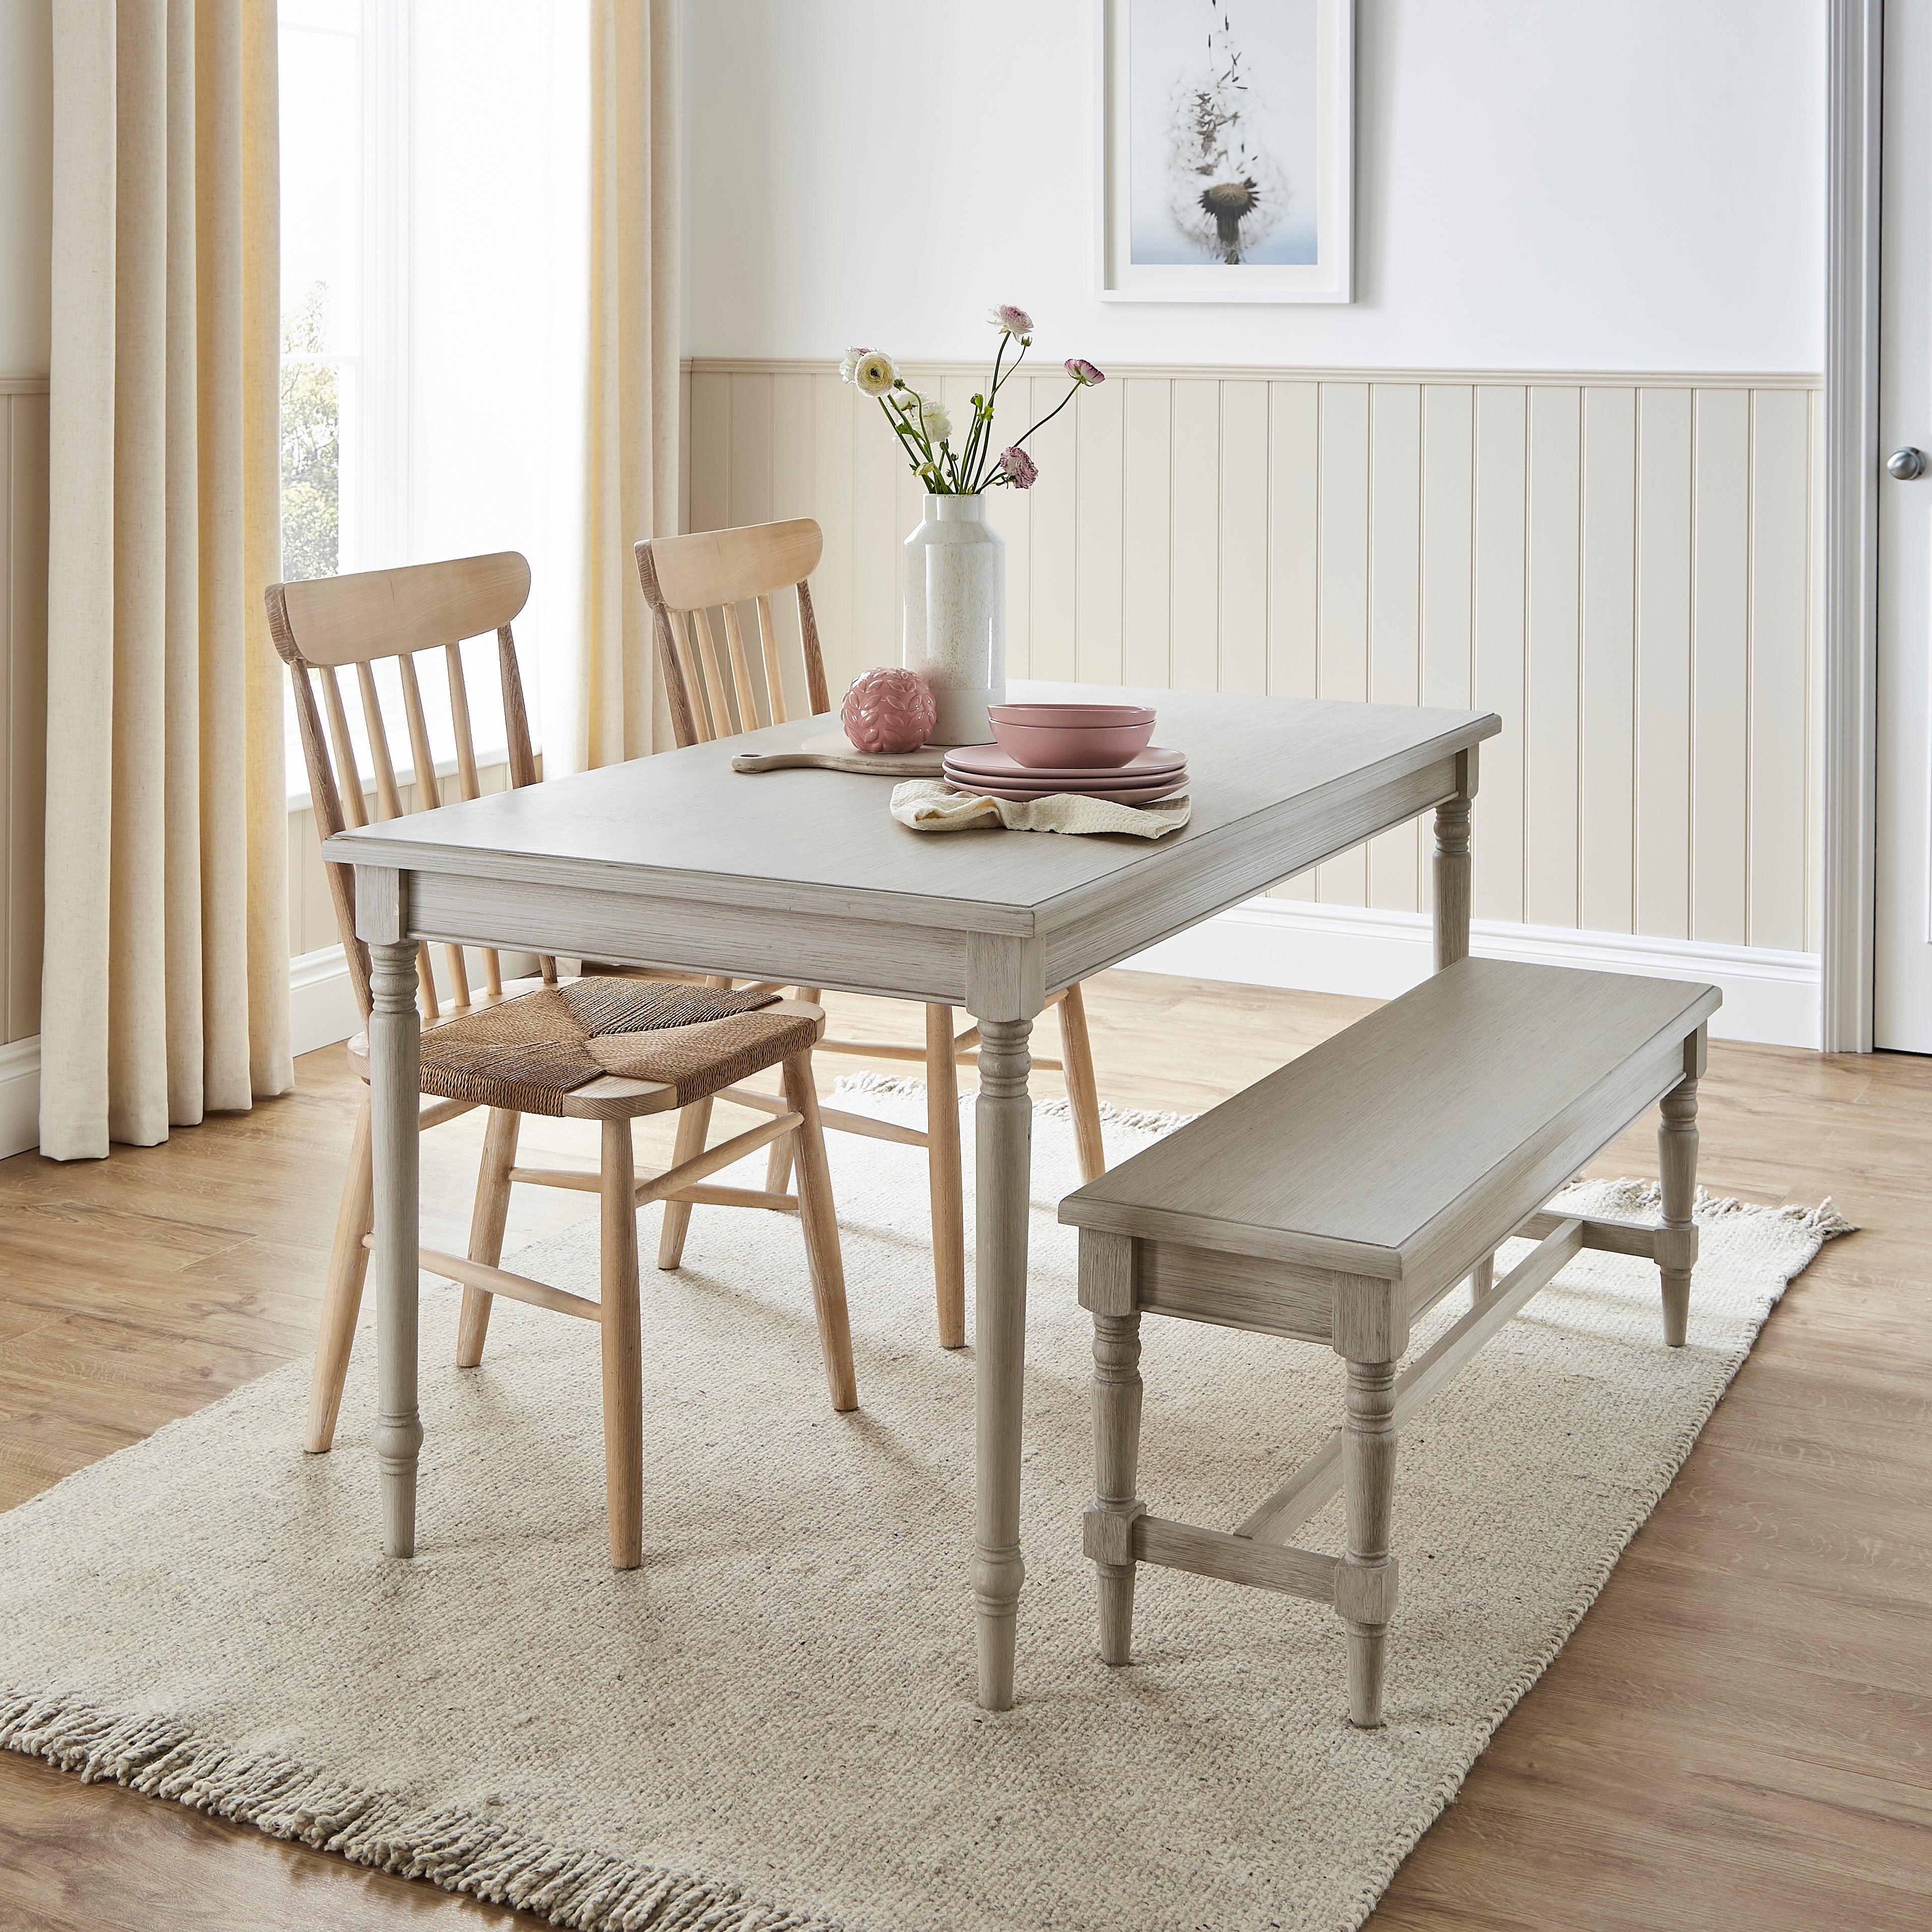 Ariella Dining Table With Ariella Bench Churchgate Dining Chairs White